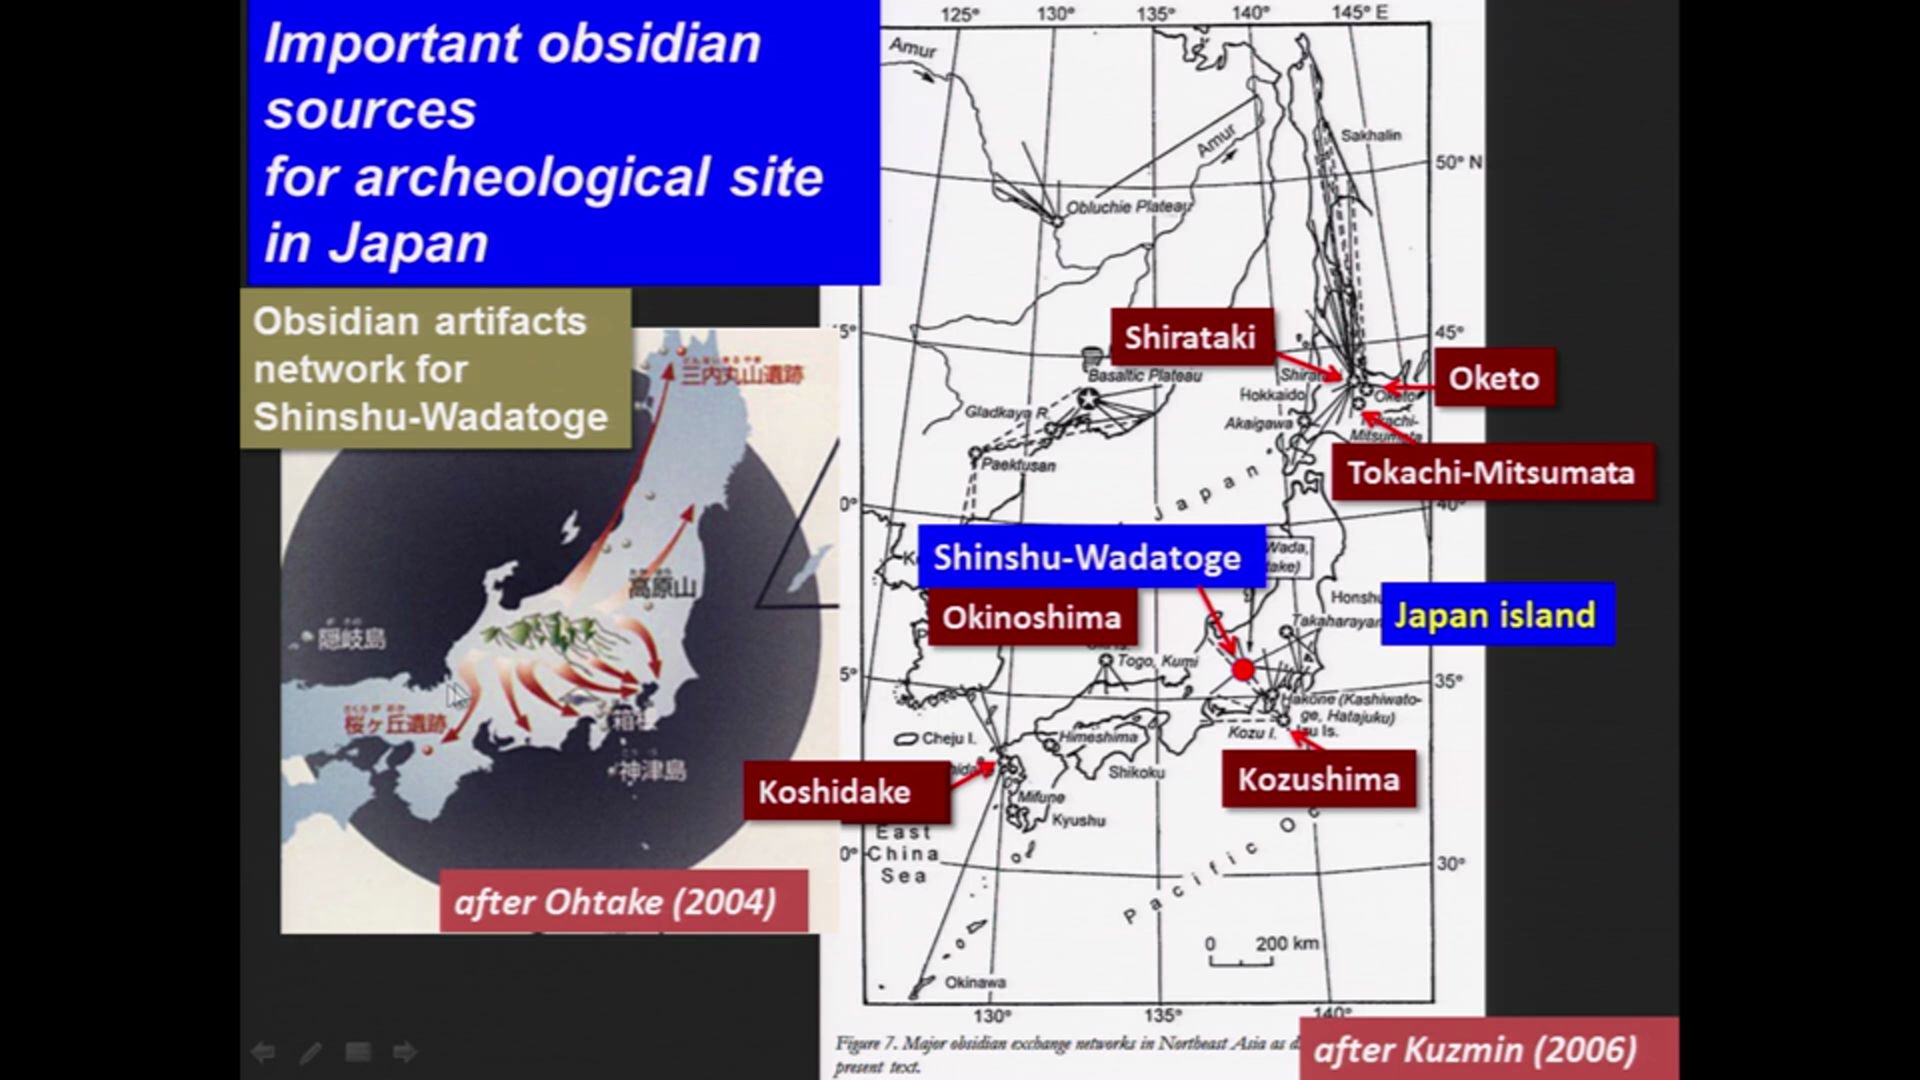 Characteristics of rock micro-texture of obsidian for some obsidian sources of the Islands of Japan. Keiji ...<br/>Wada